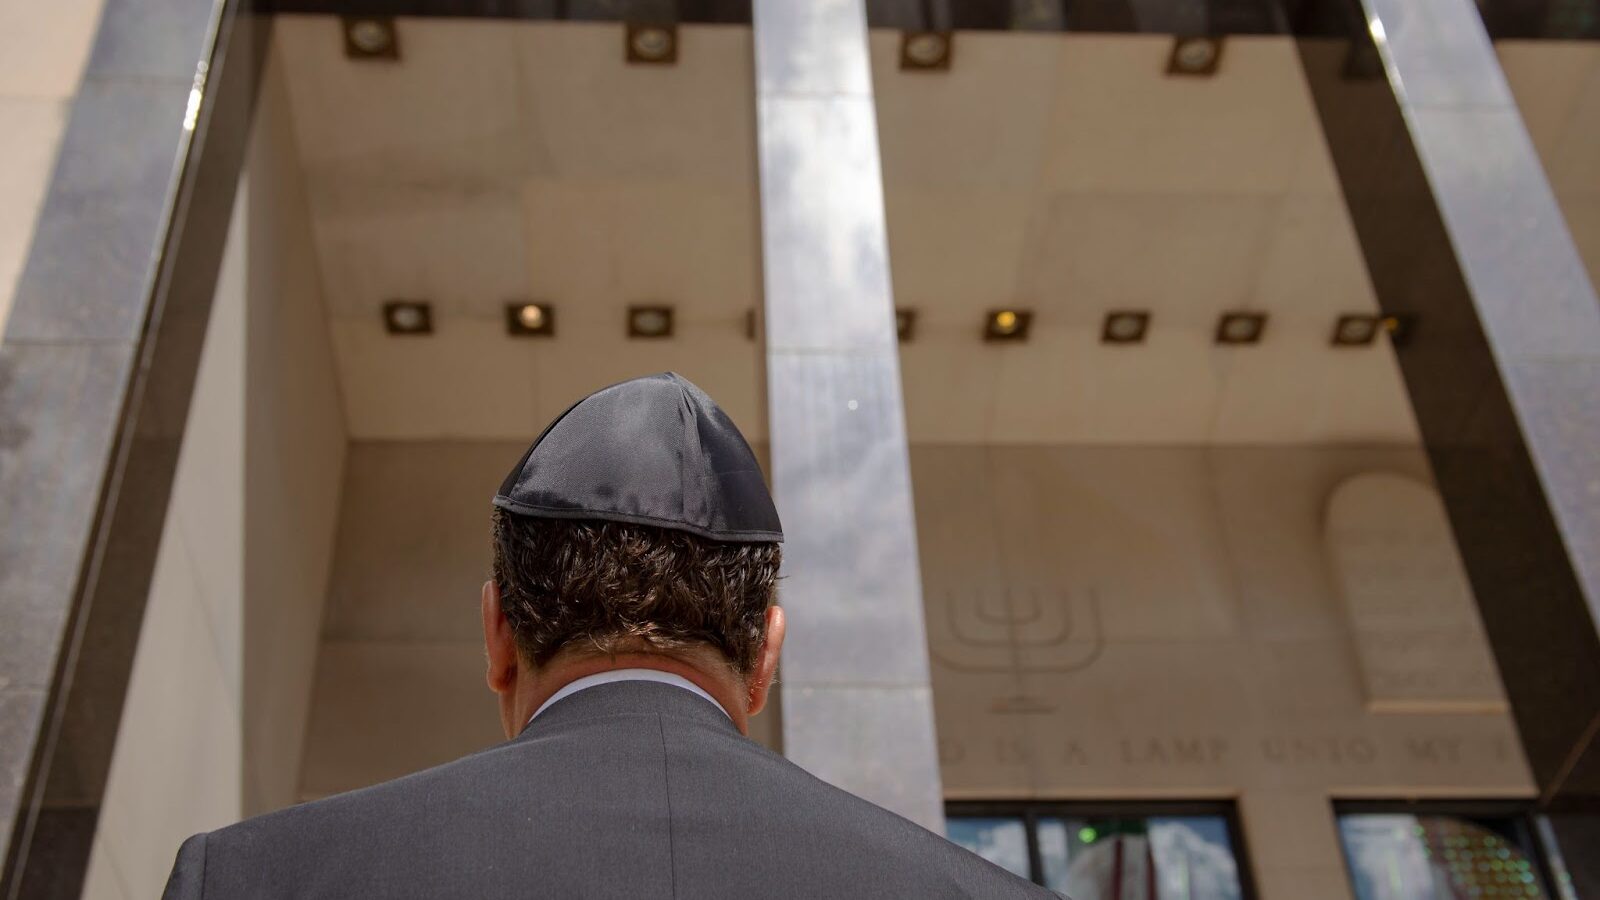 A man in a yarlmulke stands with his back towards the camera while facing the entrance of a building.